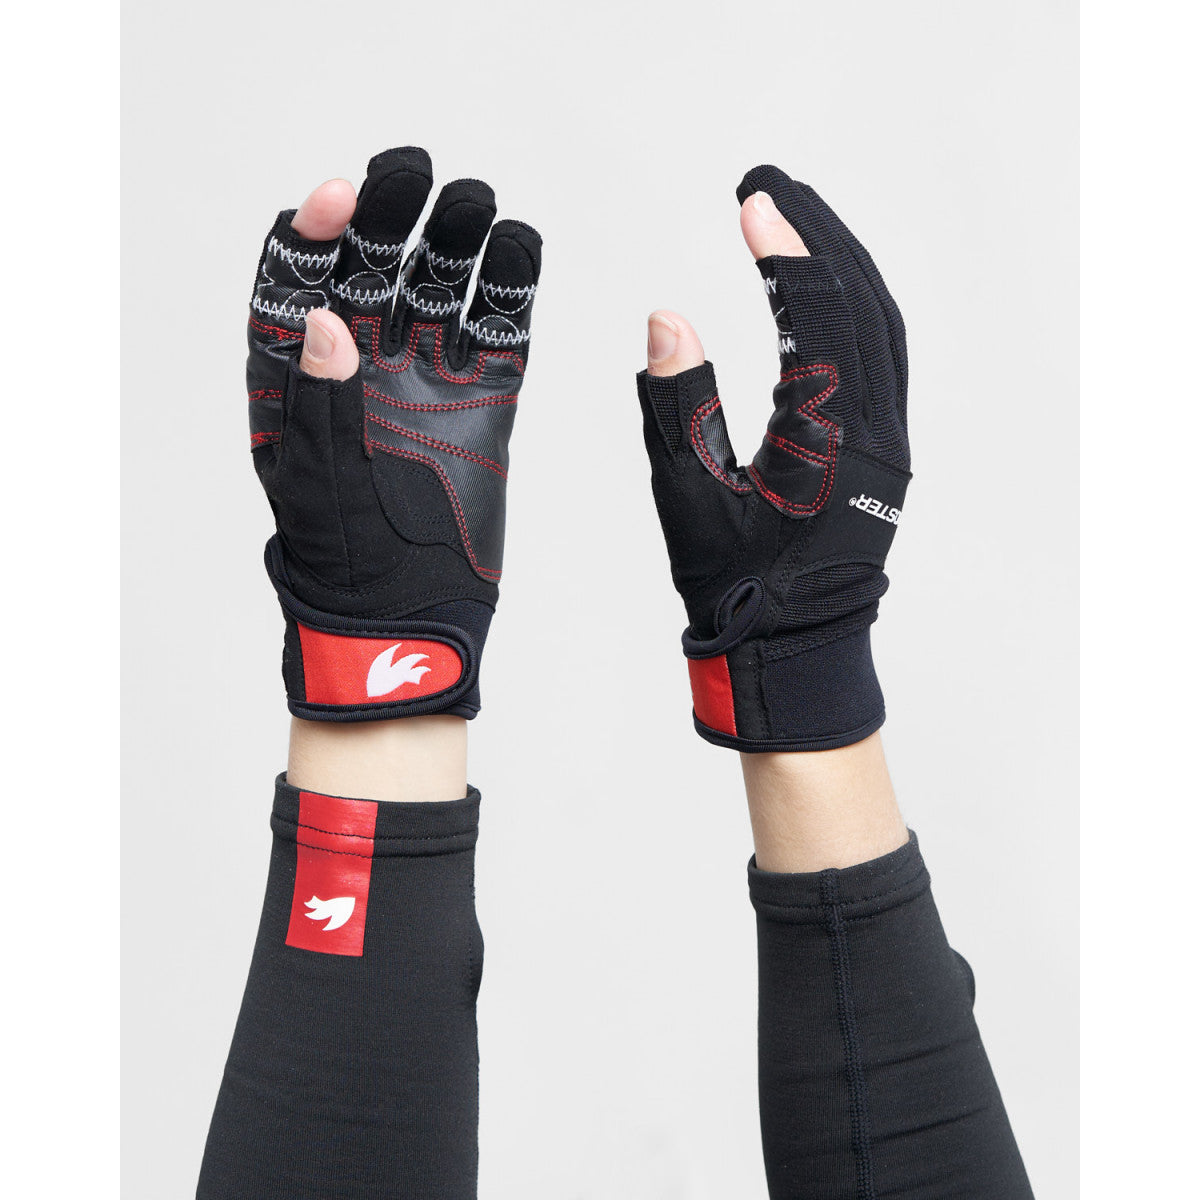 Rooster Pro Race 2 Sailing Glove Full Finger